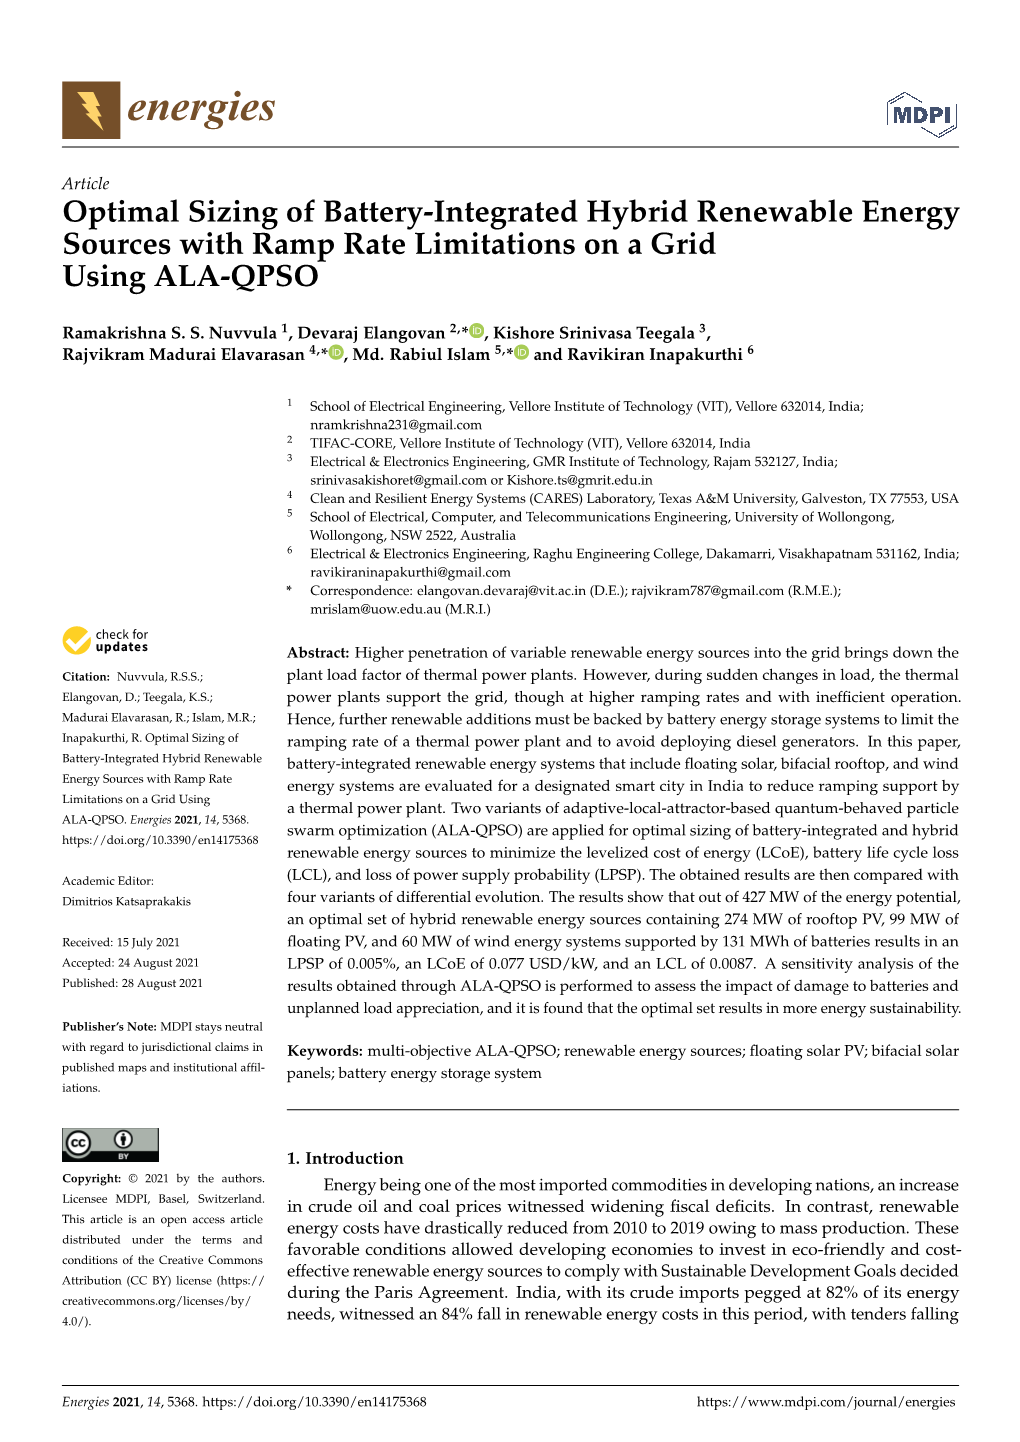 Optimal Sizing of Battery-Integrated Hybrid Renewable Energy Sources with Ramp Rate Limitations on a Grid Using ALA-QPSO